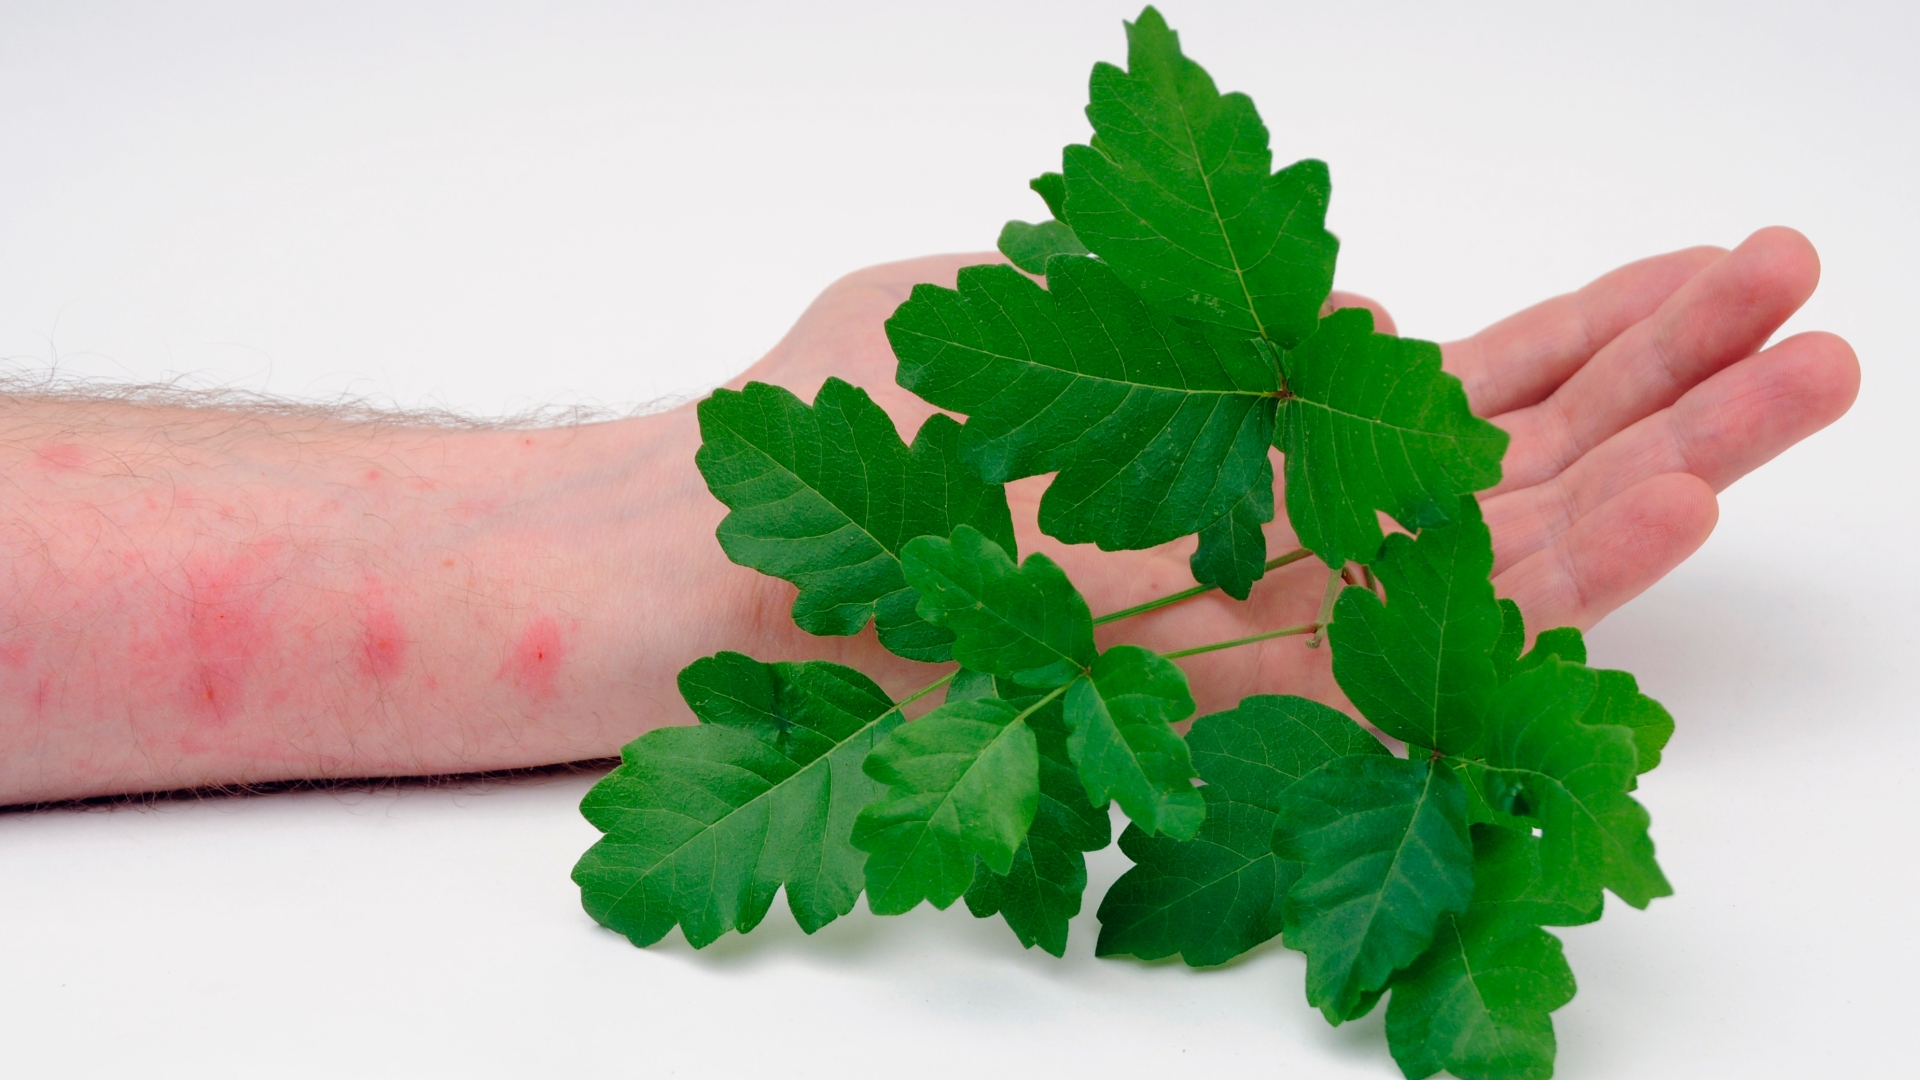 It’s all fun and games – until someone gets a rash from poison ivy or poison oak. Here, David Cosenza, MD, medical director of virtual care at Atrium Health shares that basics about what you need to know when it comes to poison ivy and poison oak. 